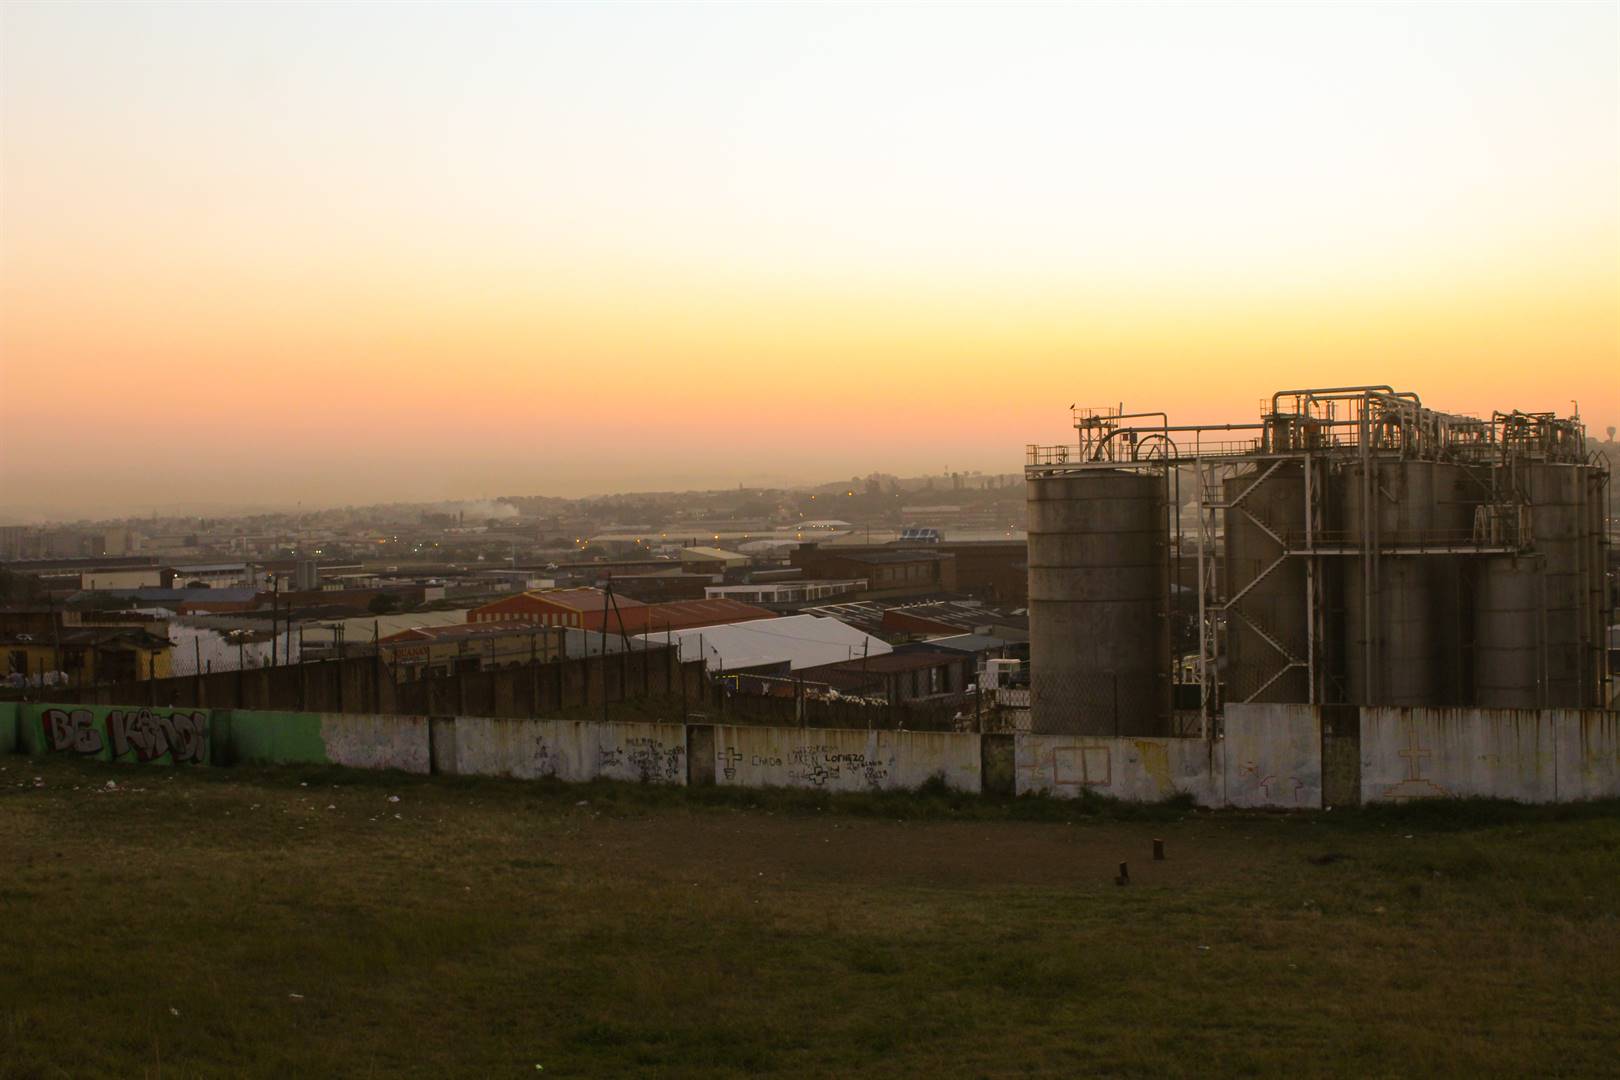 Communities in the South Durban Basin living close to petrochemical industries complain that they cannot breathe due to polluted air from the refineries.Picture: Sandile Duma/Spotlight